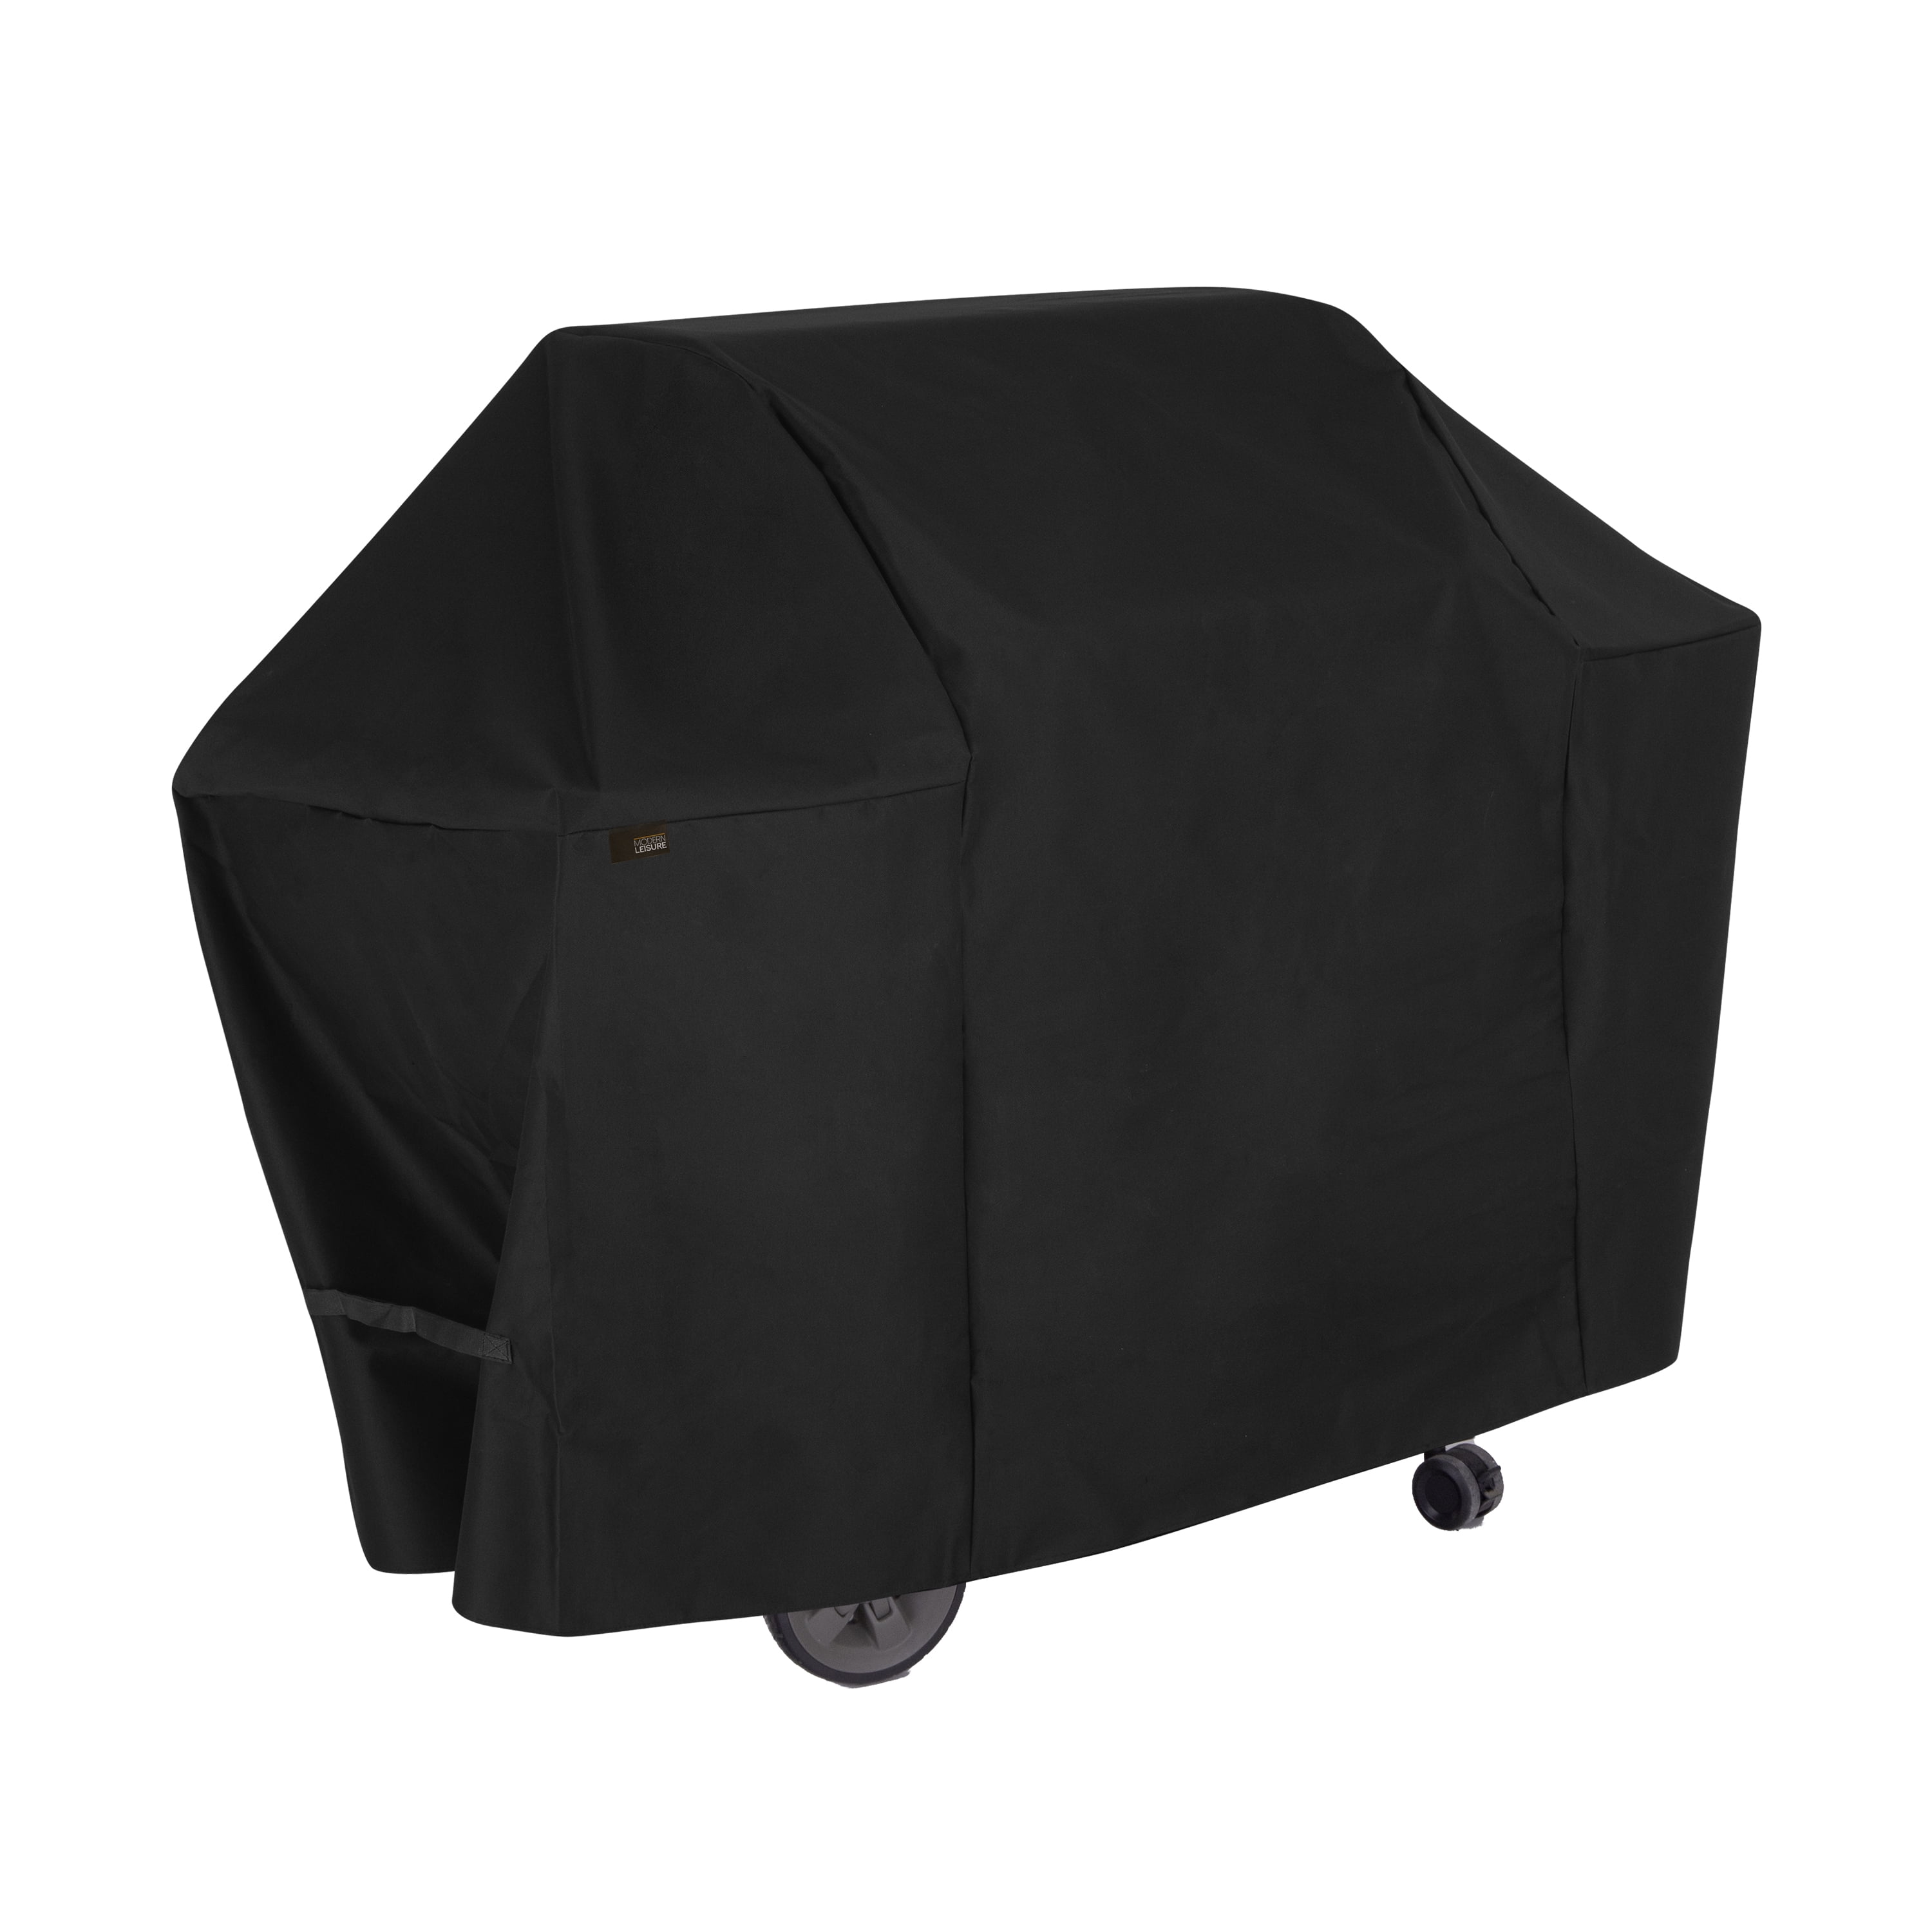 Universal 55 In Grill Cover Fits Most 3 Burner Grills Y7 for sale online 